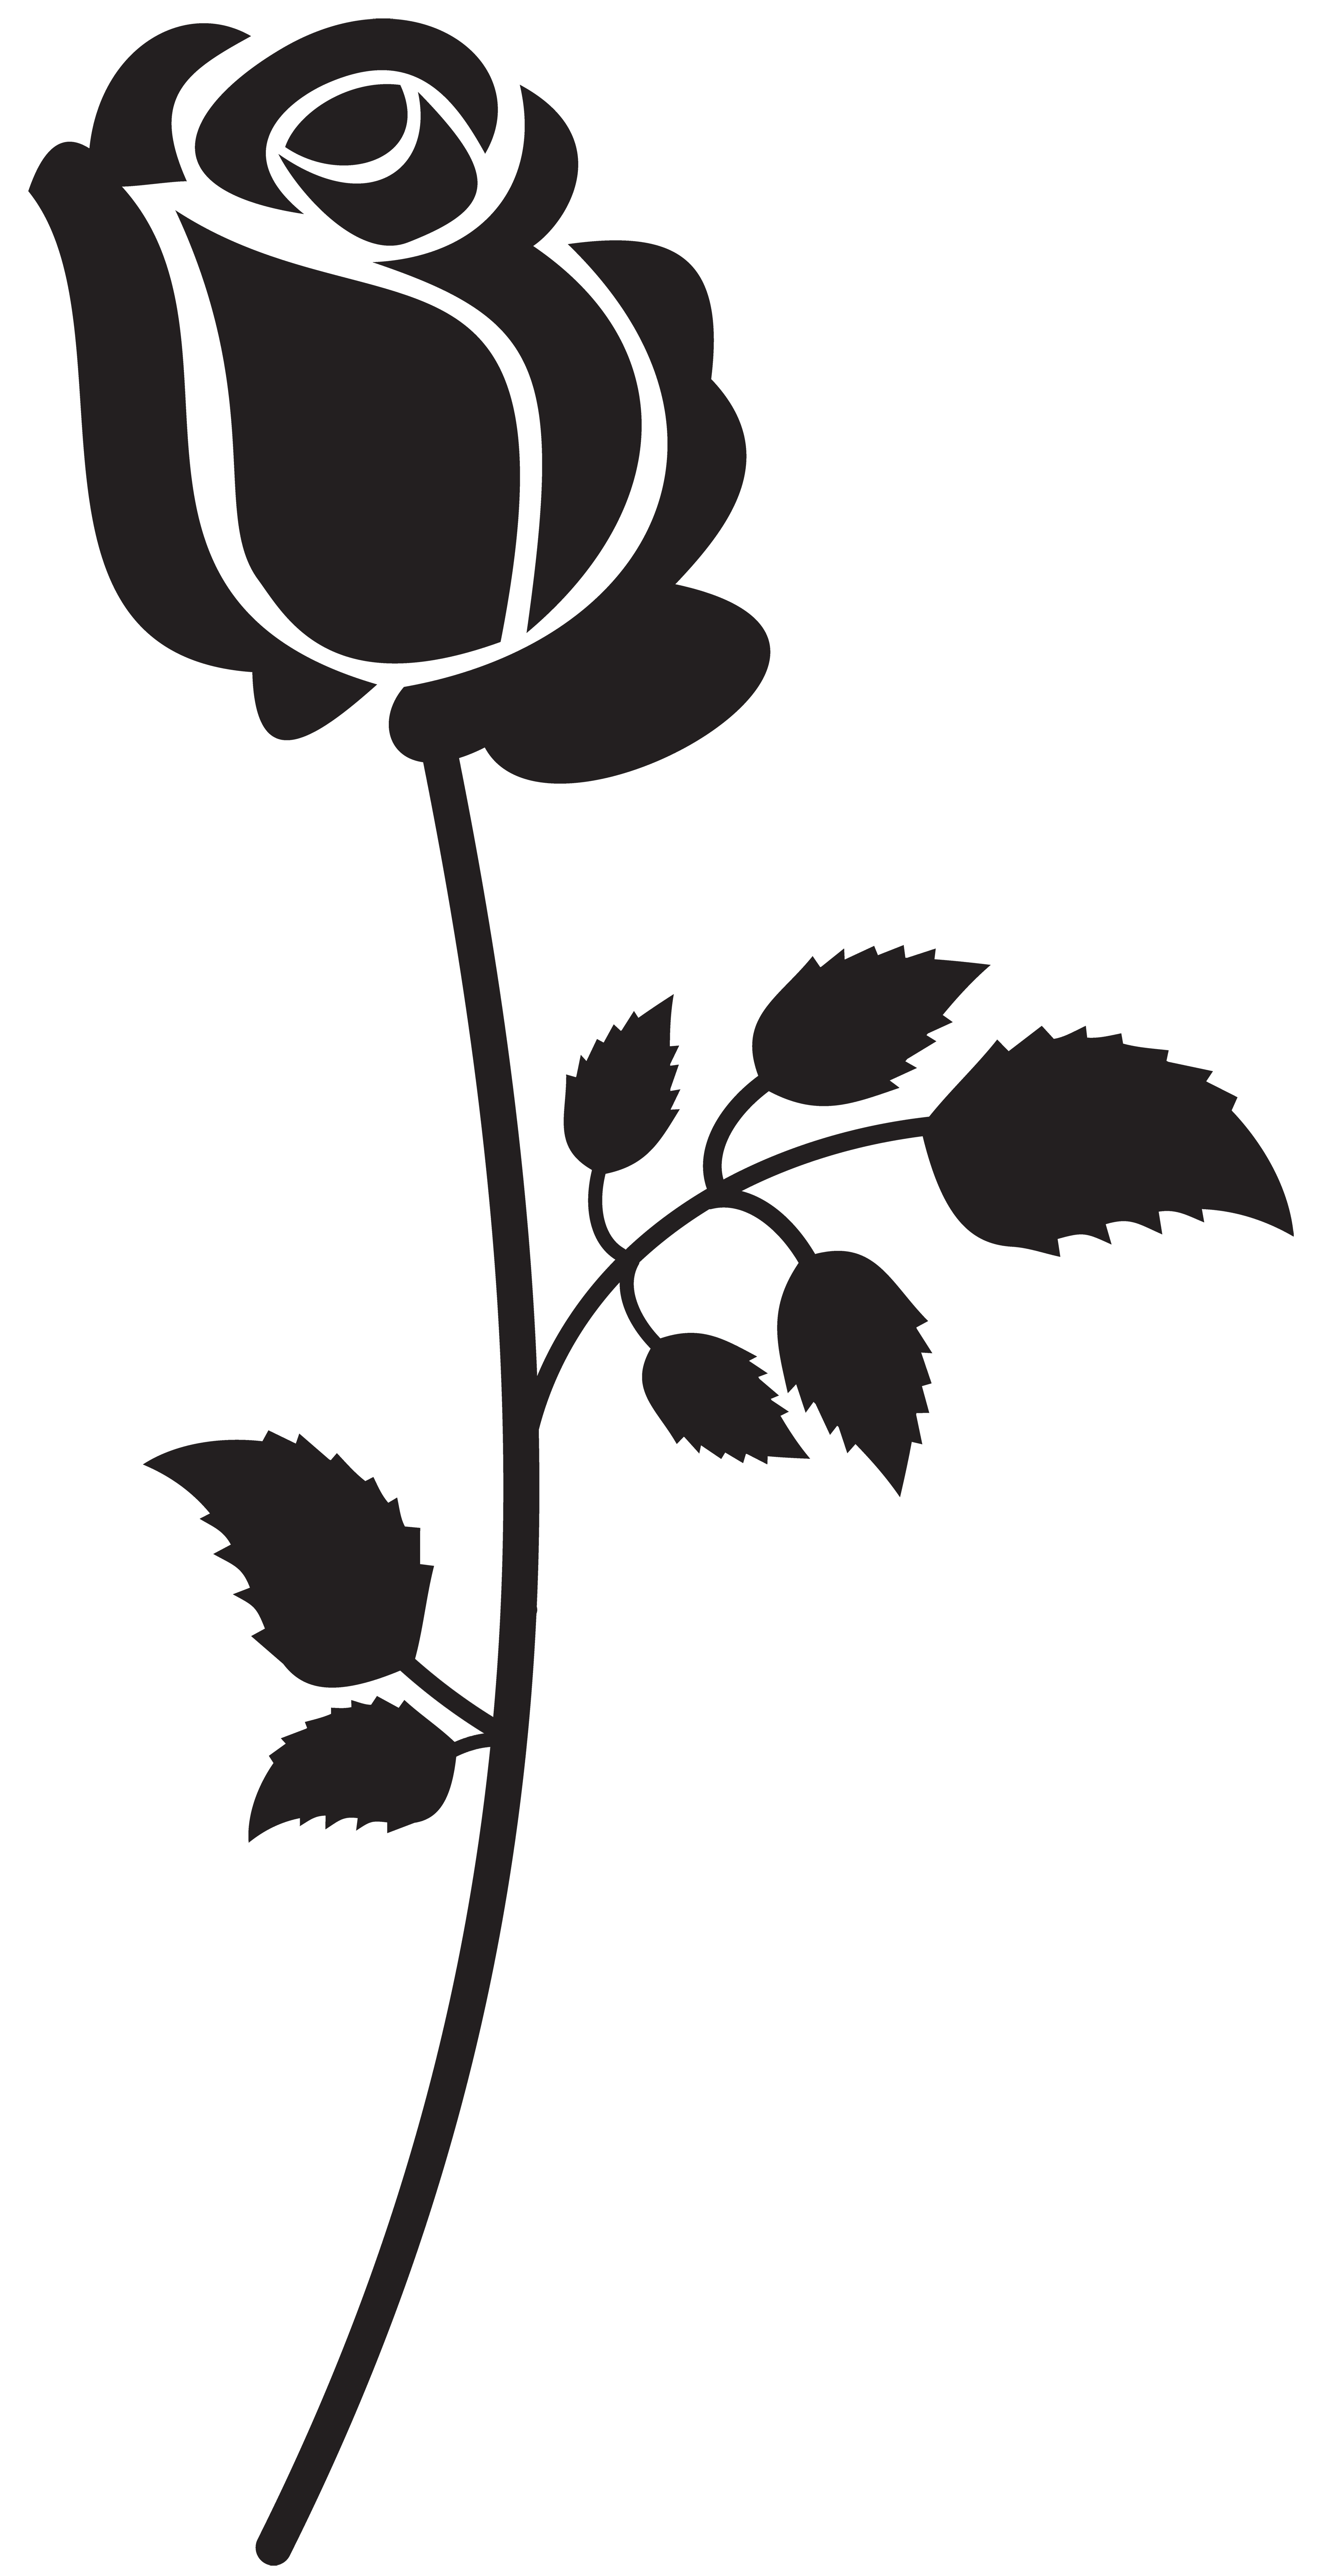 Rose silhouette clipart 20 free Cliparts | Download images on